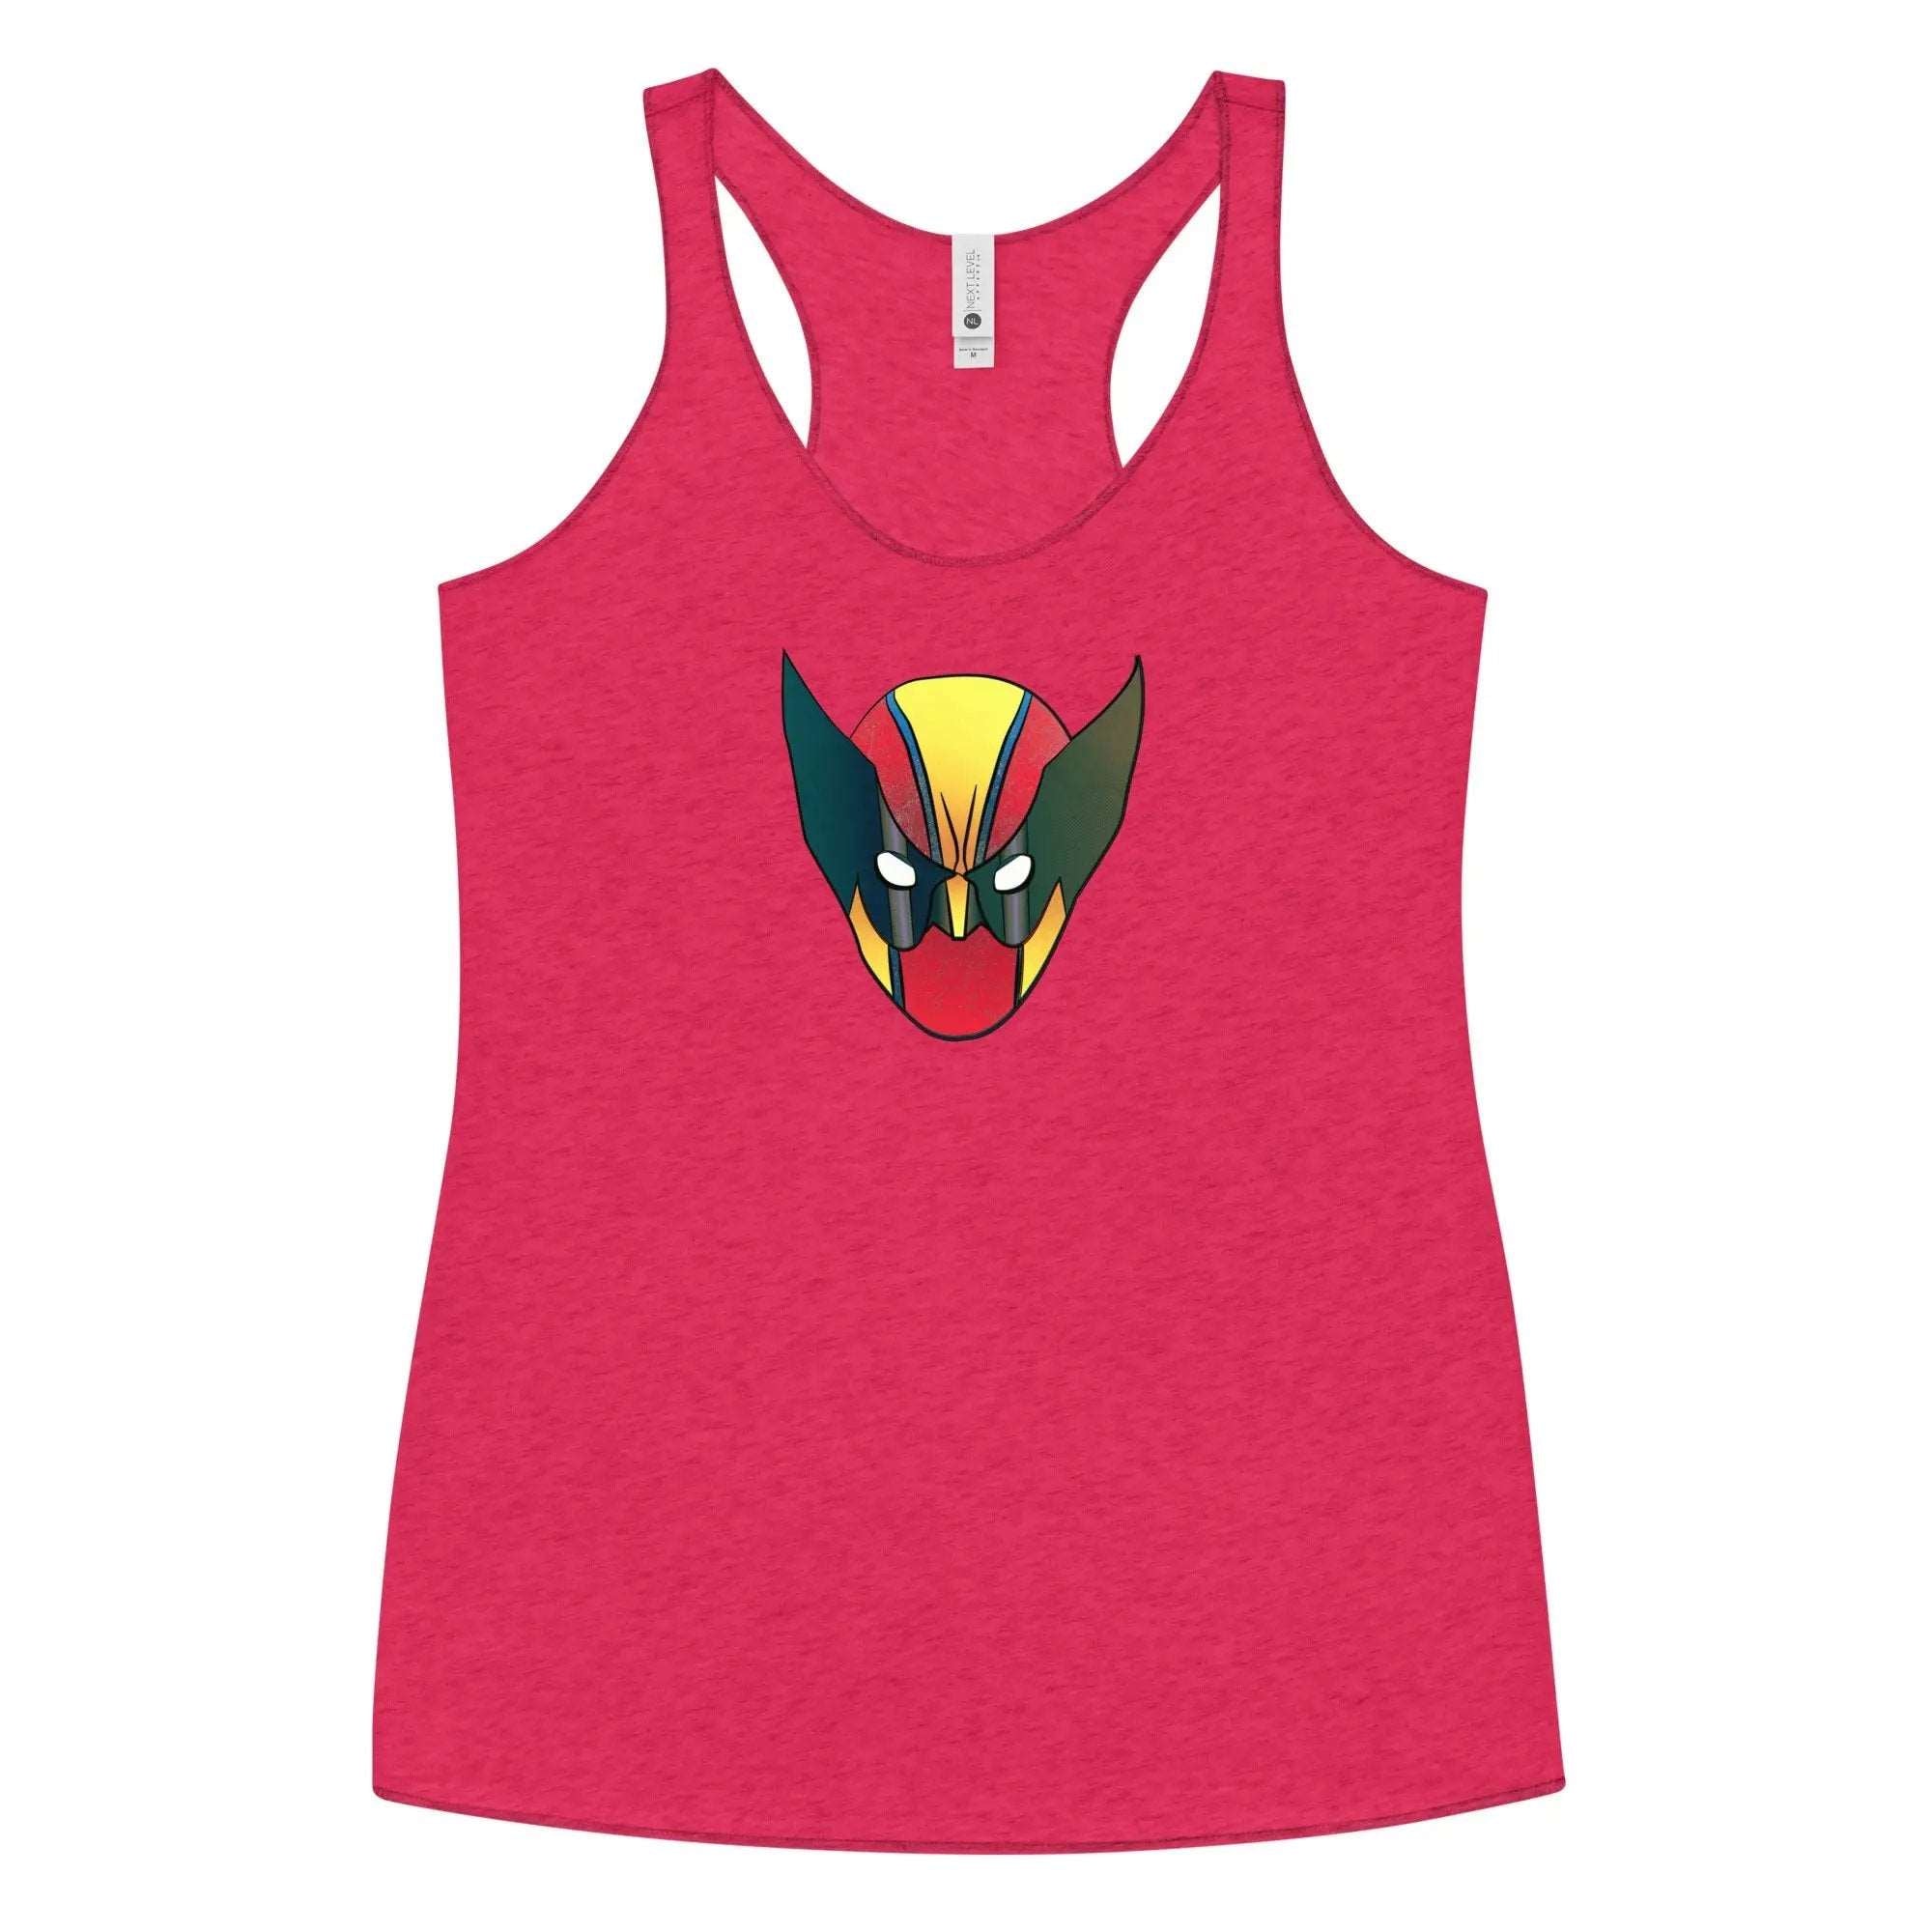 a women's tank top with a cartoon character on it